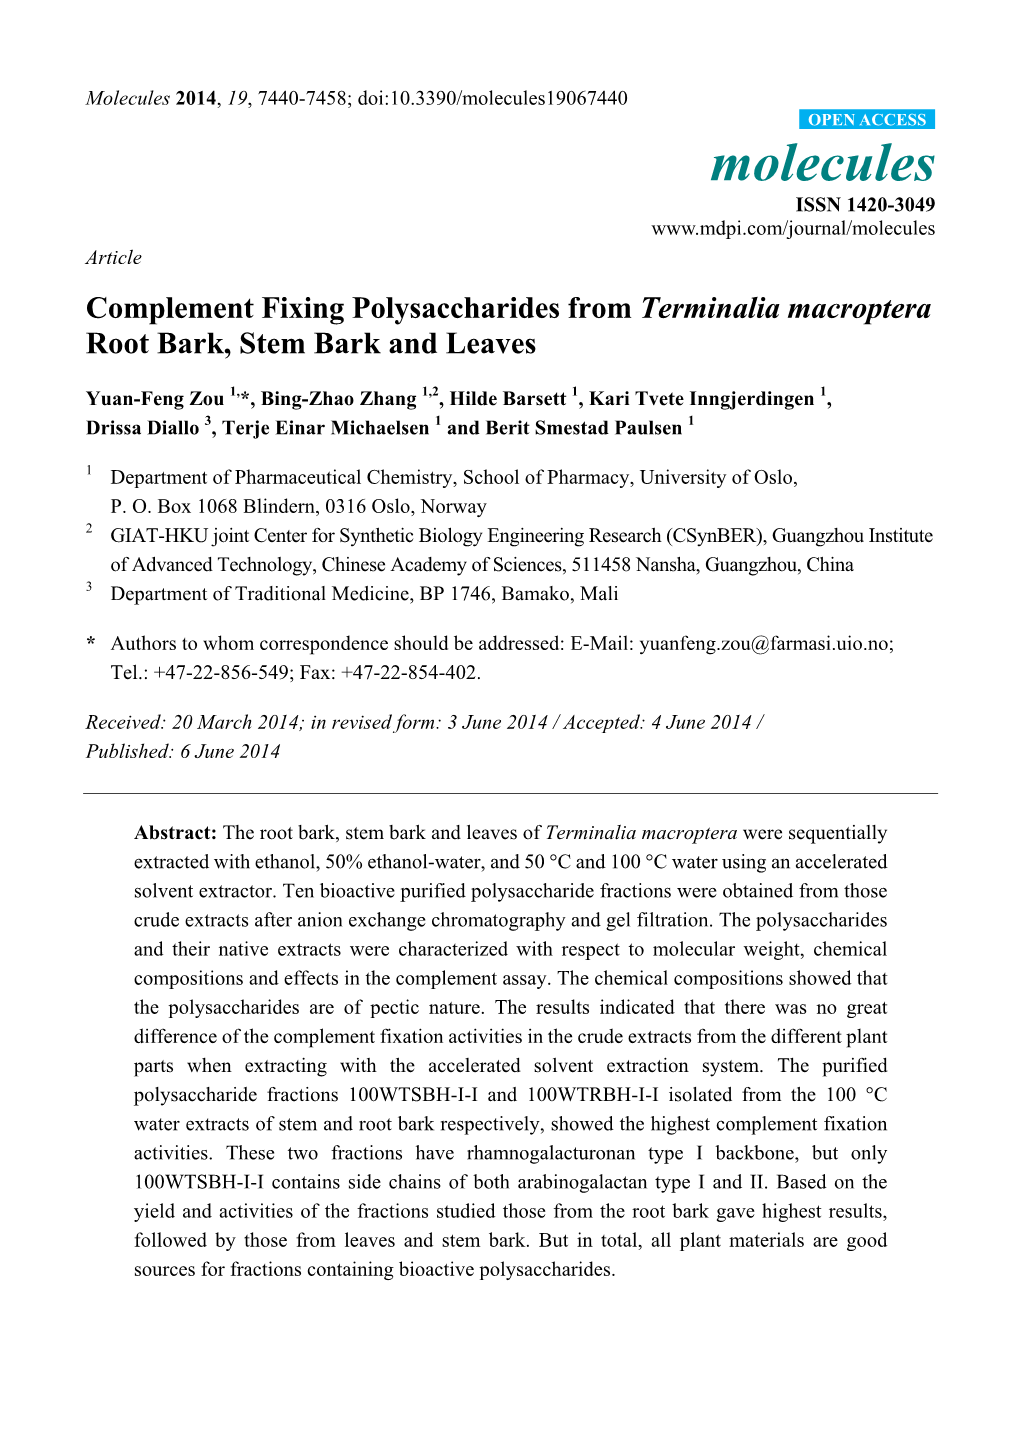 Complement Fixing Polysaccharides from Terminalia Macroptera Root Bark, Stem Bark and Leaves